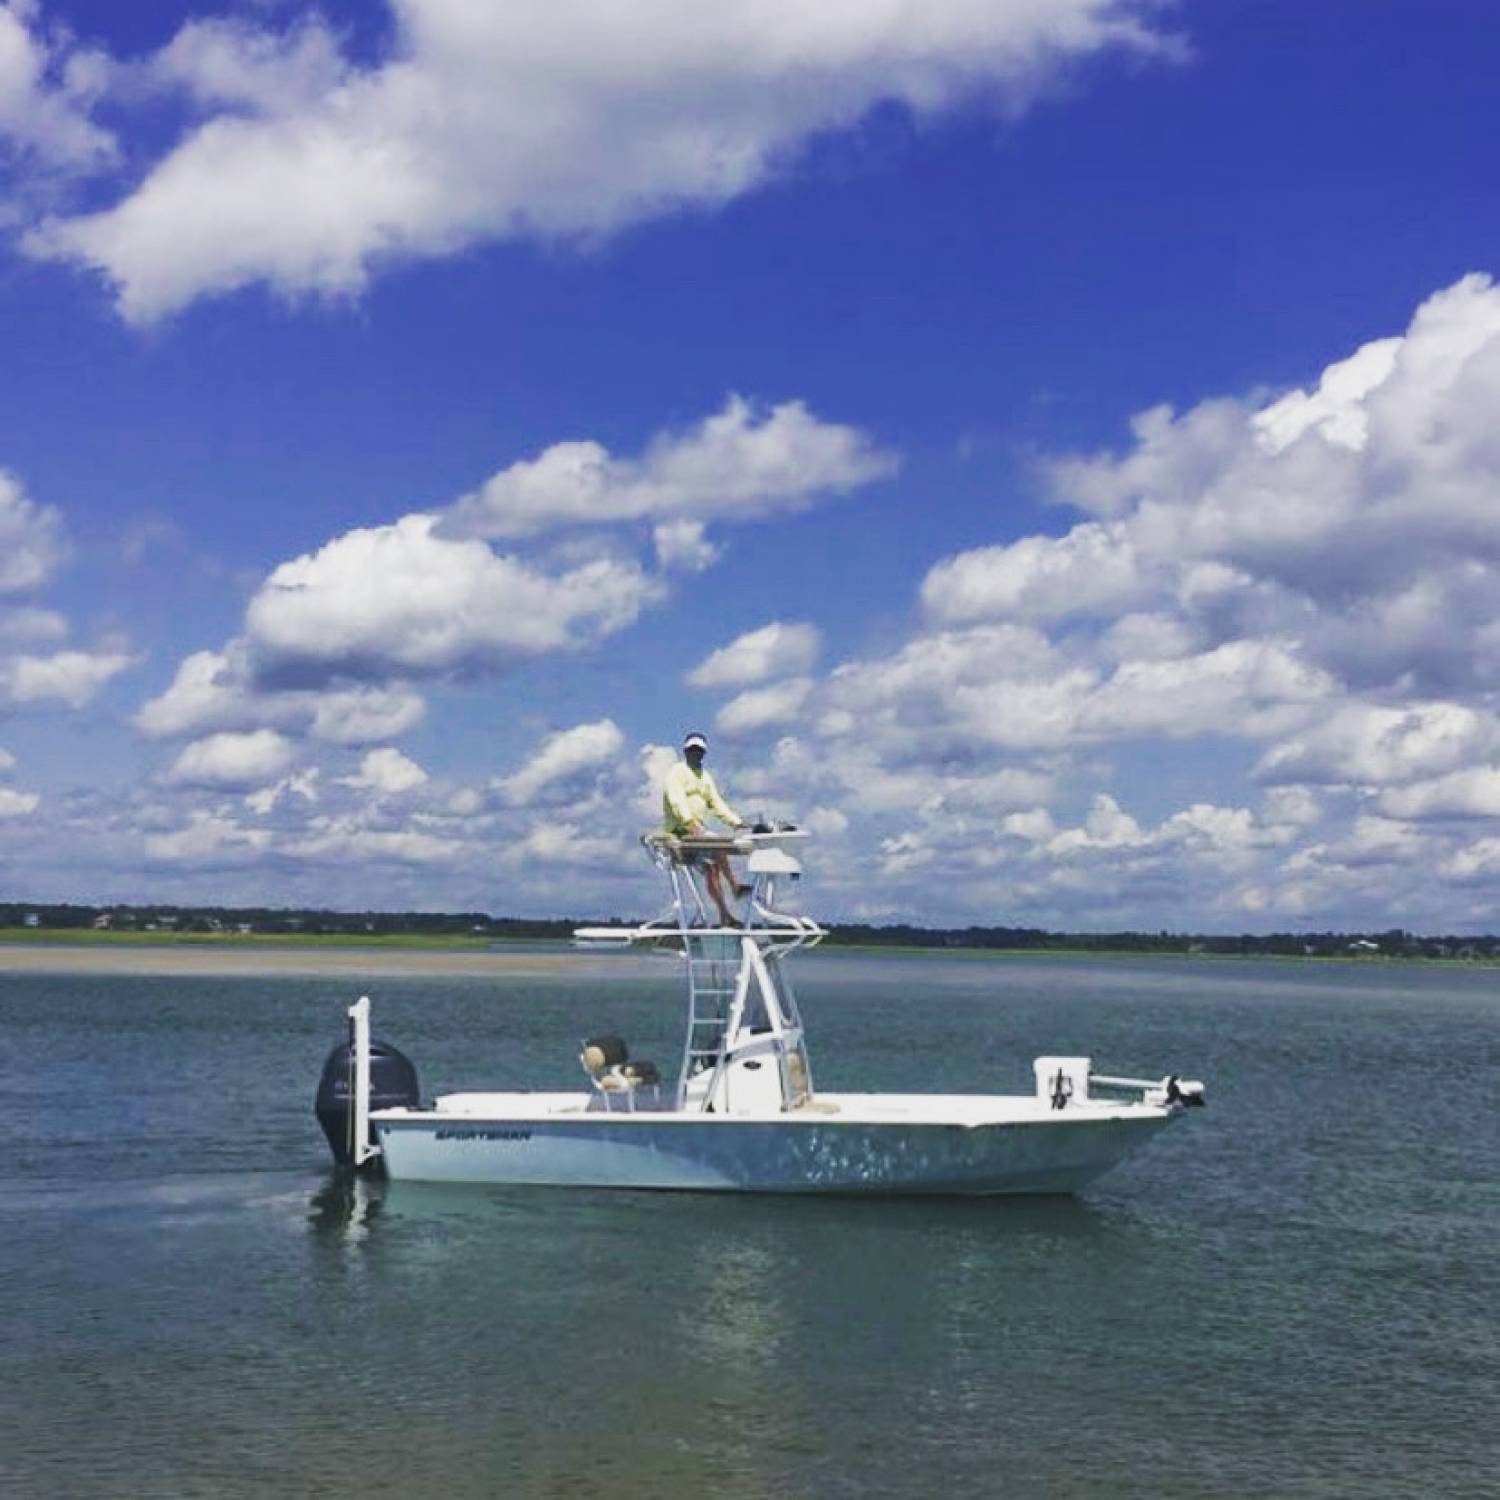 Darrell proud on his tower ready to fish.  This photo was taken from Lea Island, NC in August 2...